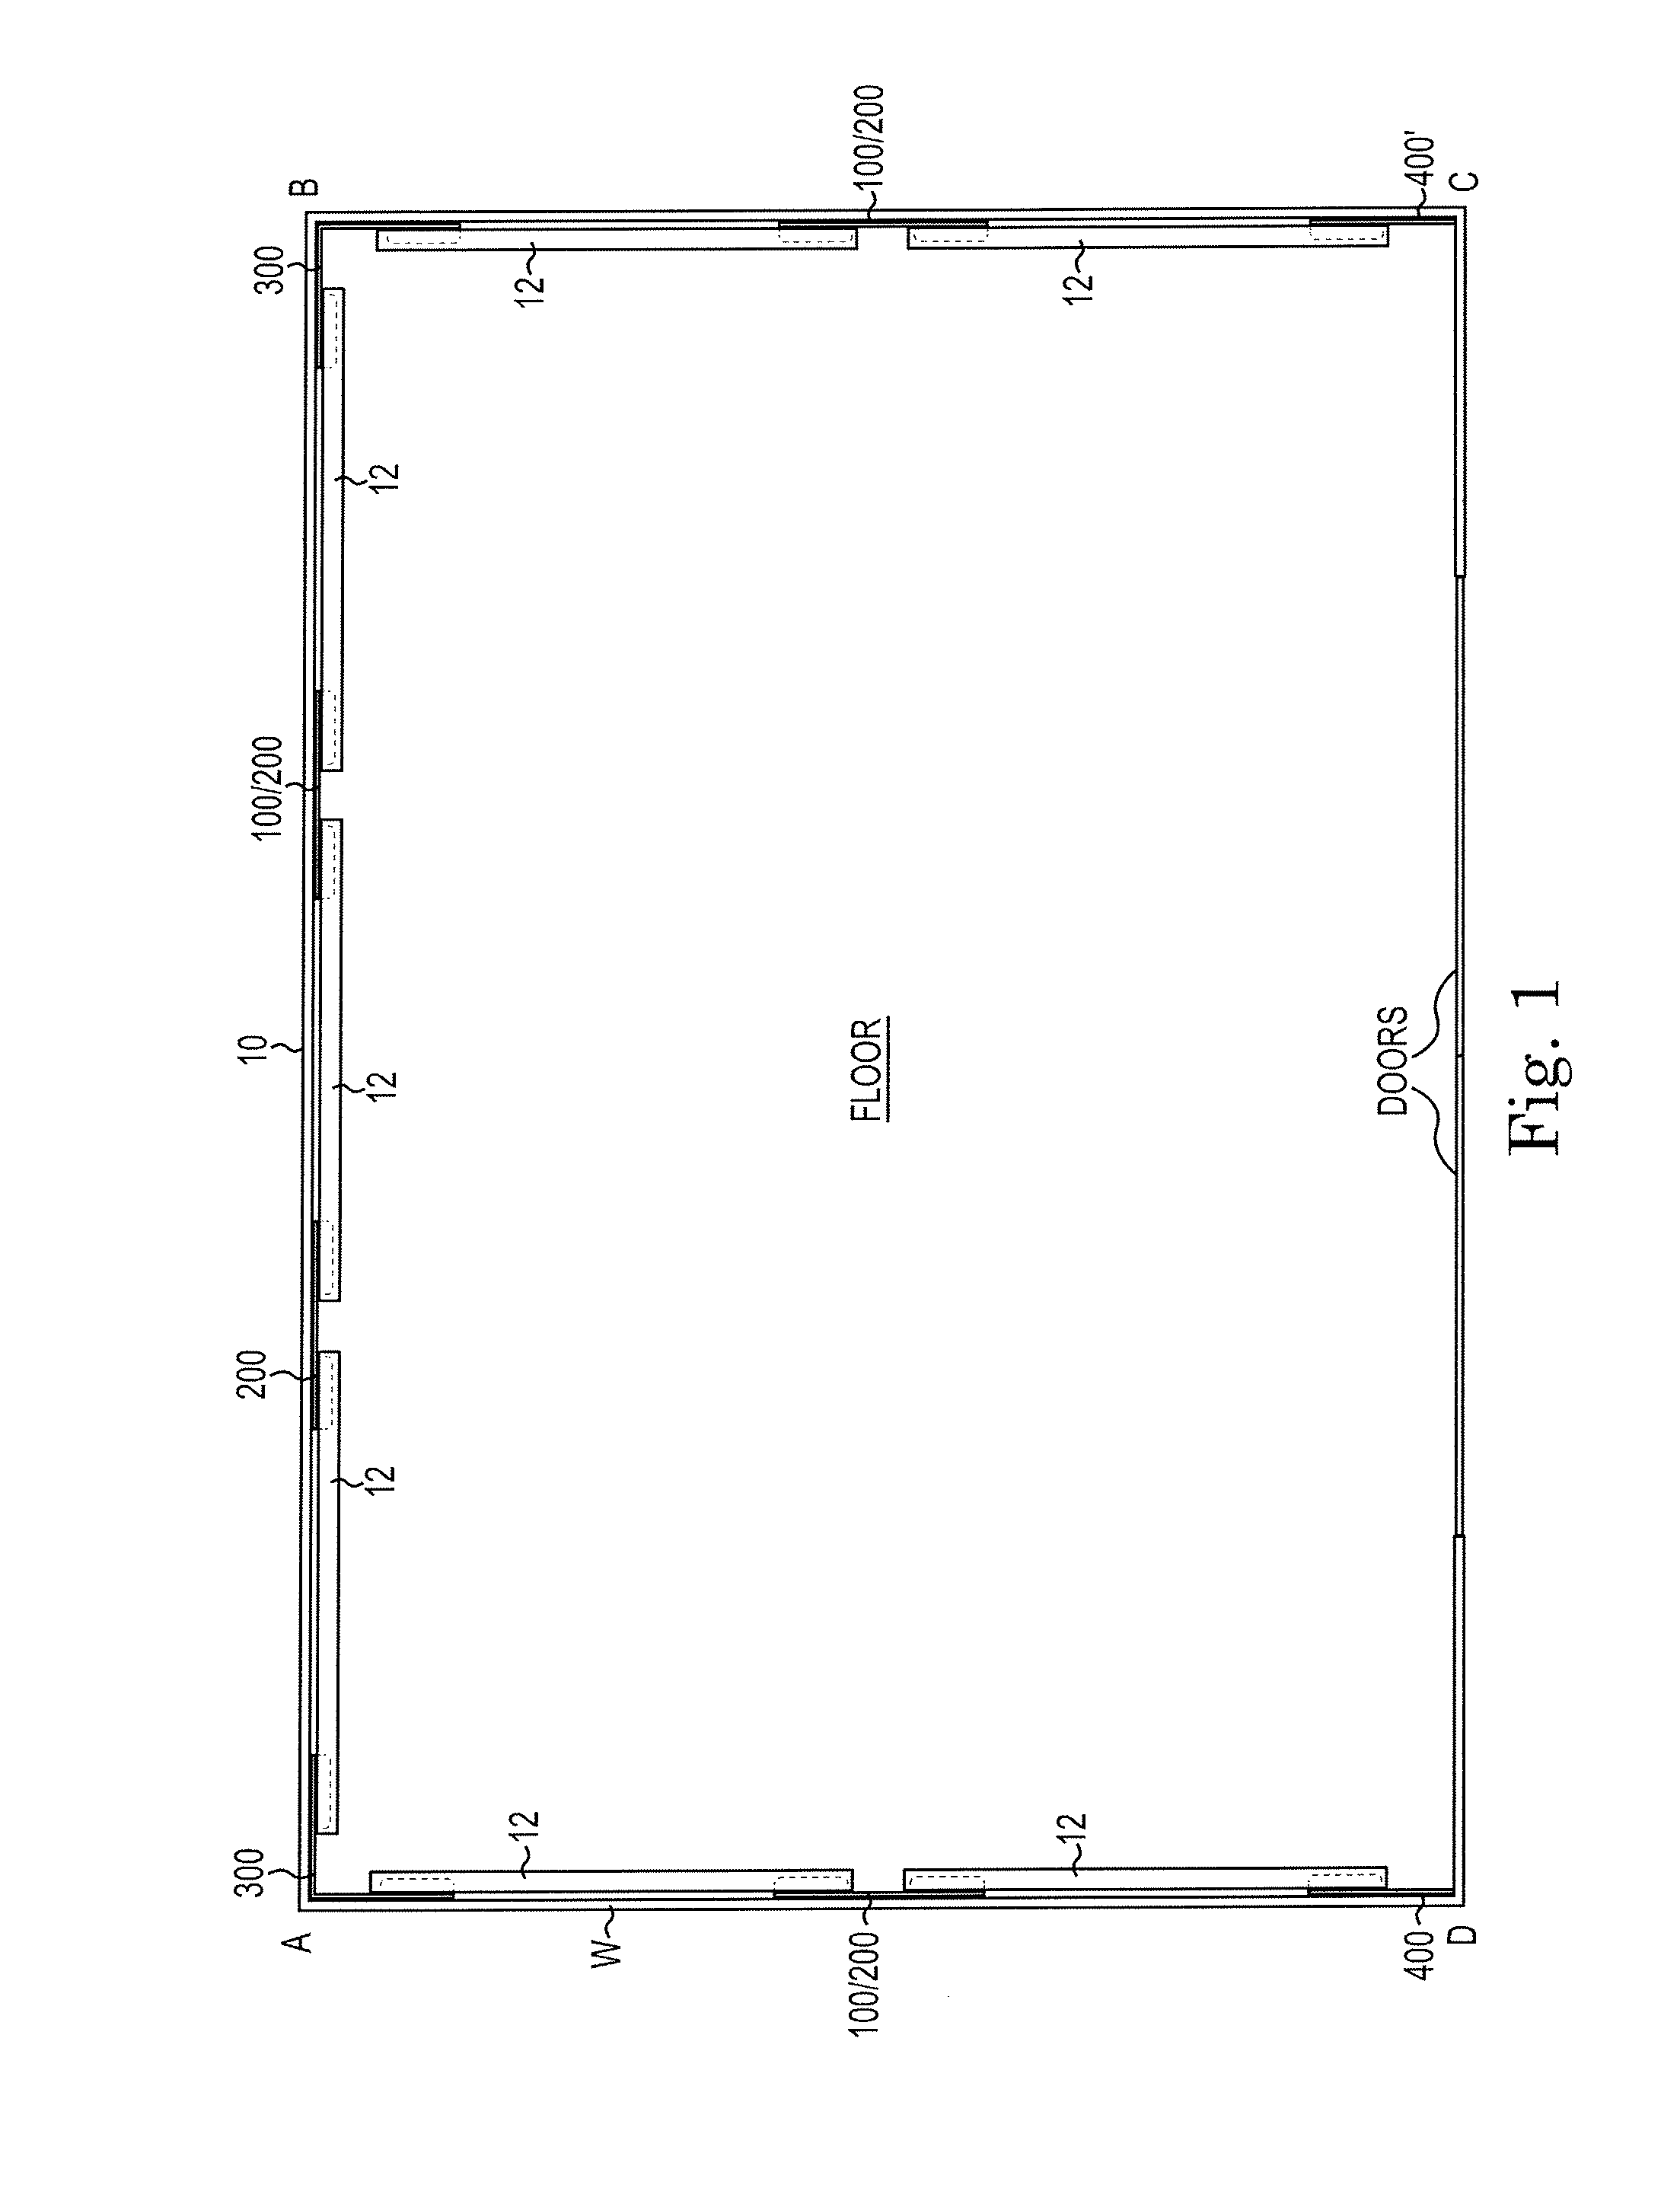 Device and methods for installing elevator cab interior wall panels